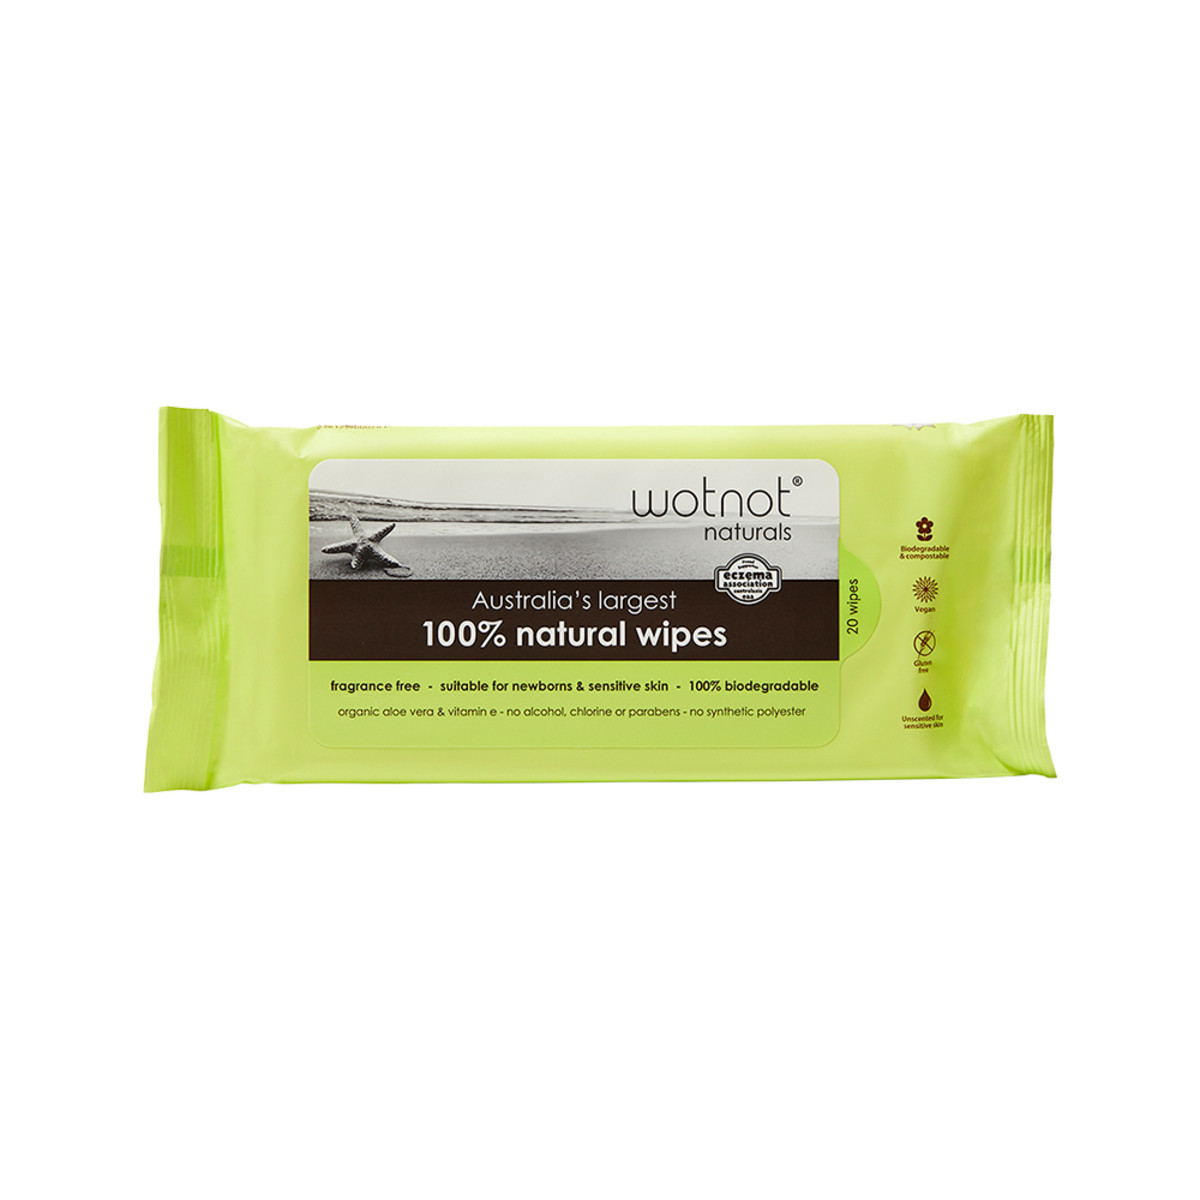 Wotnot Naturals 100% Natural Wipes (Soft Pack Travel Case Refill) x 20 Pack